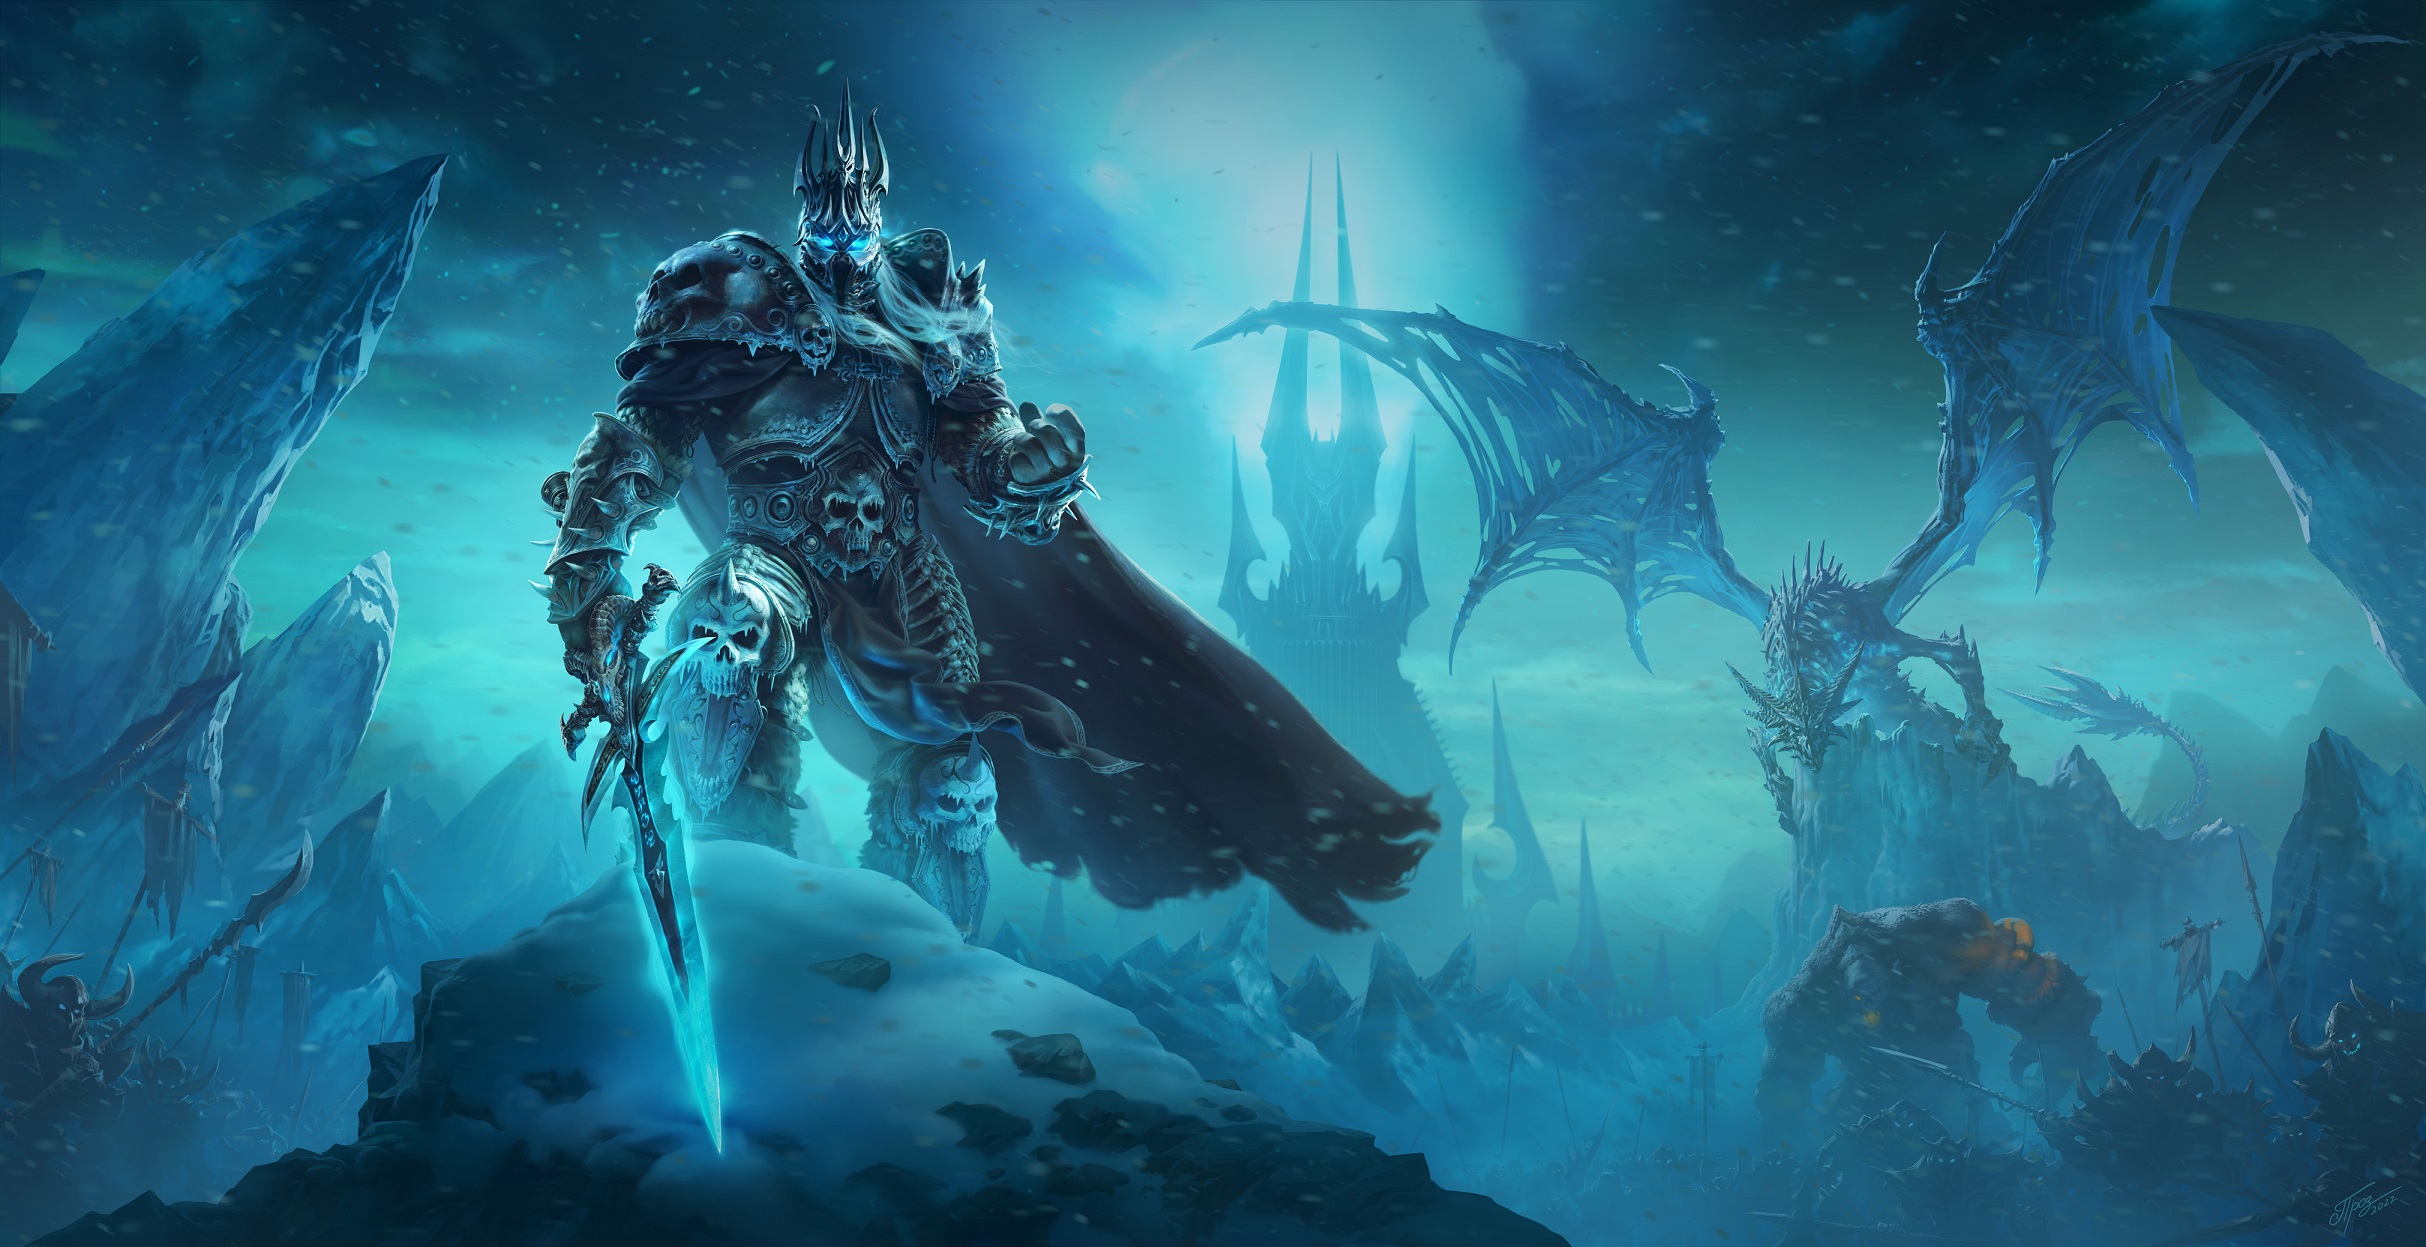 Wrath of the Lich King coming to WoW Classic in September